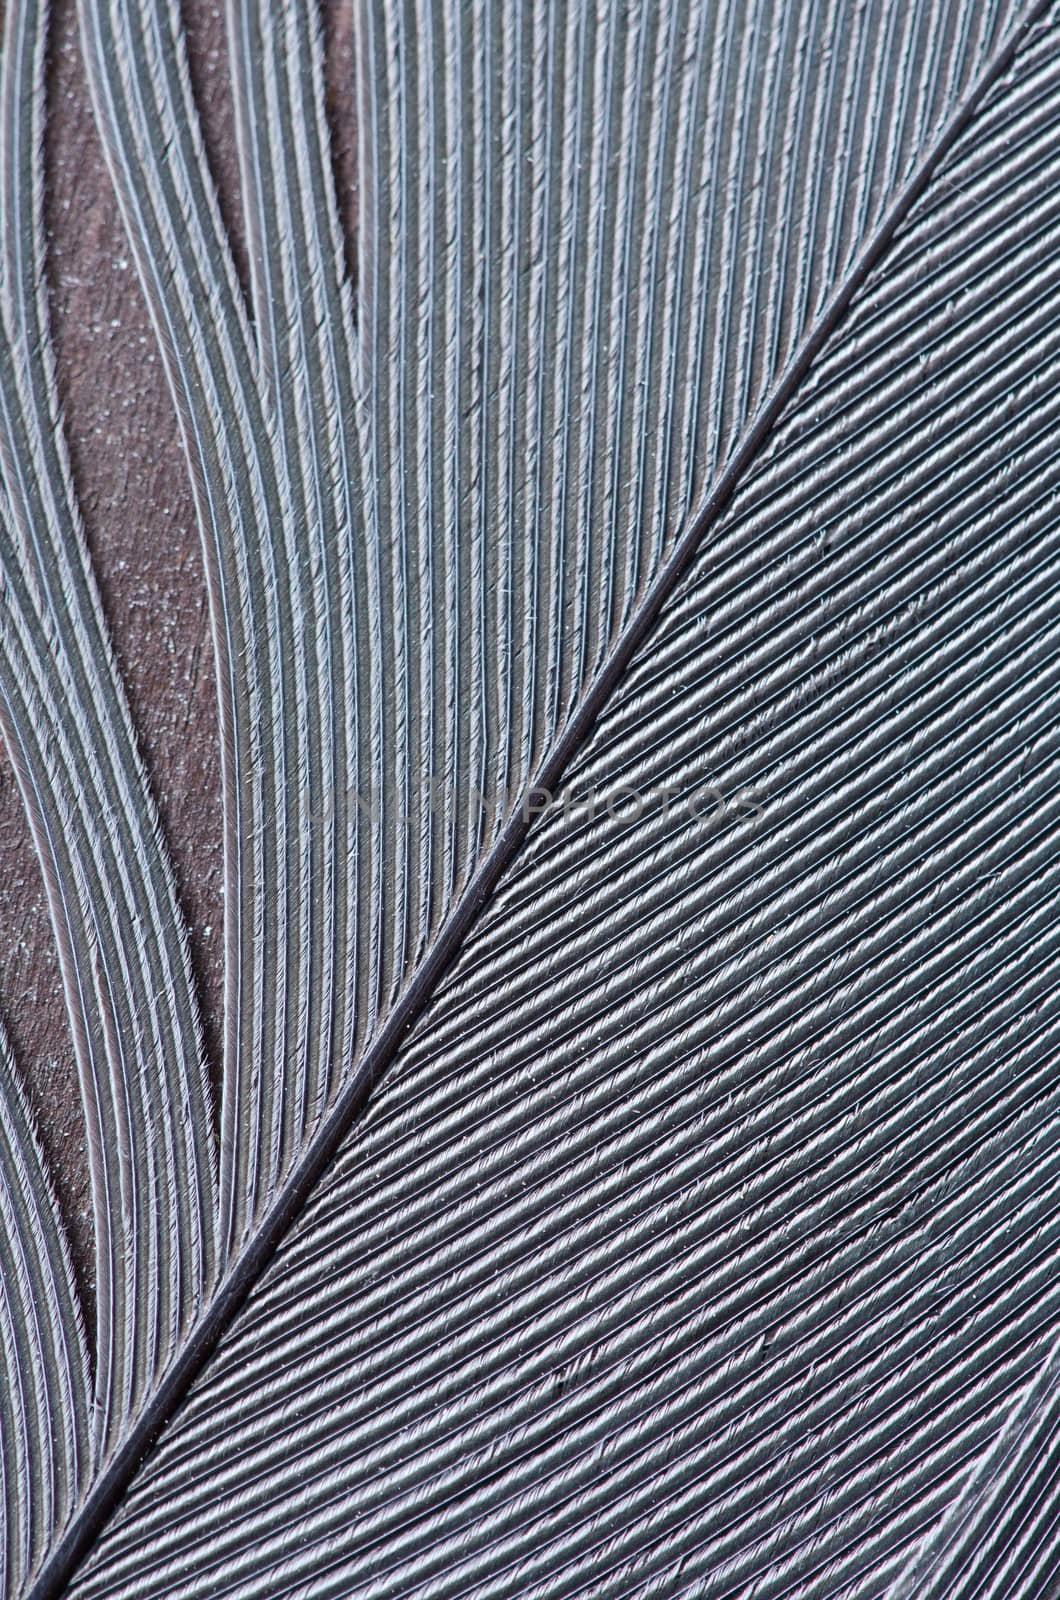 Detail of feather by richpav